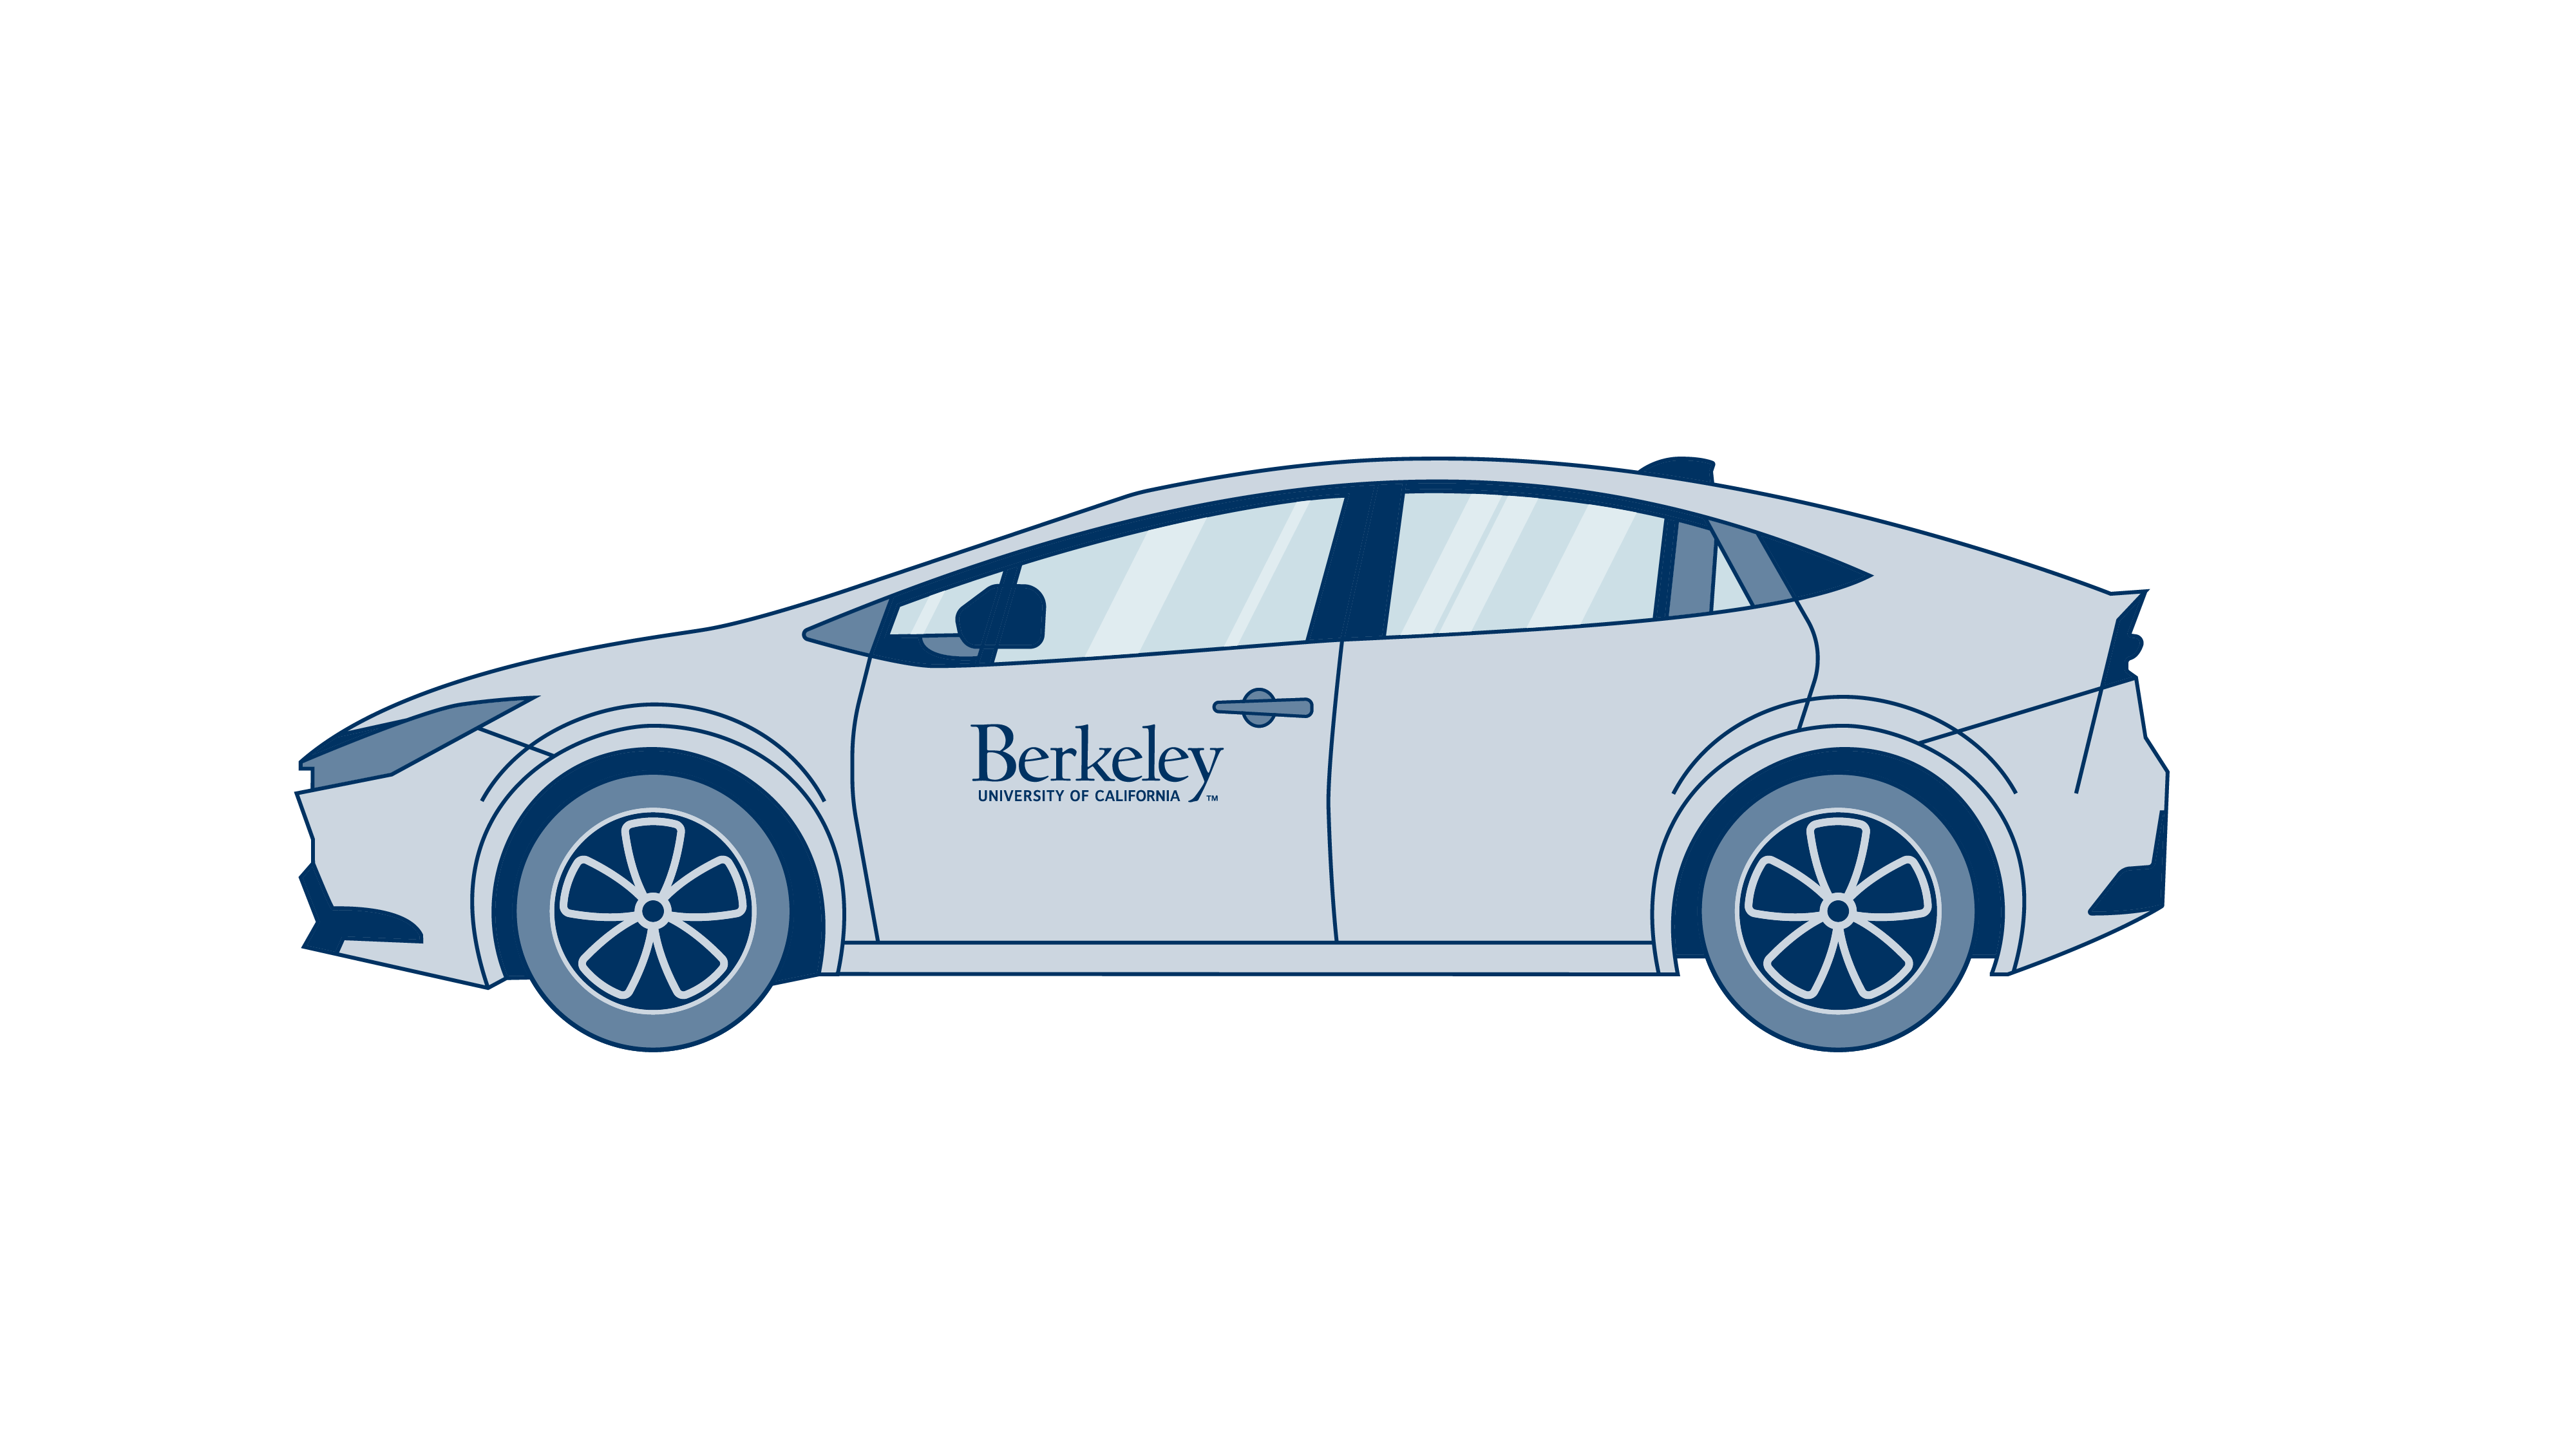 Diagram of logo placement on a Toyota Prius